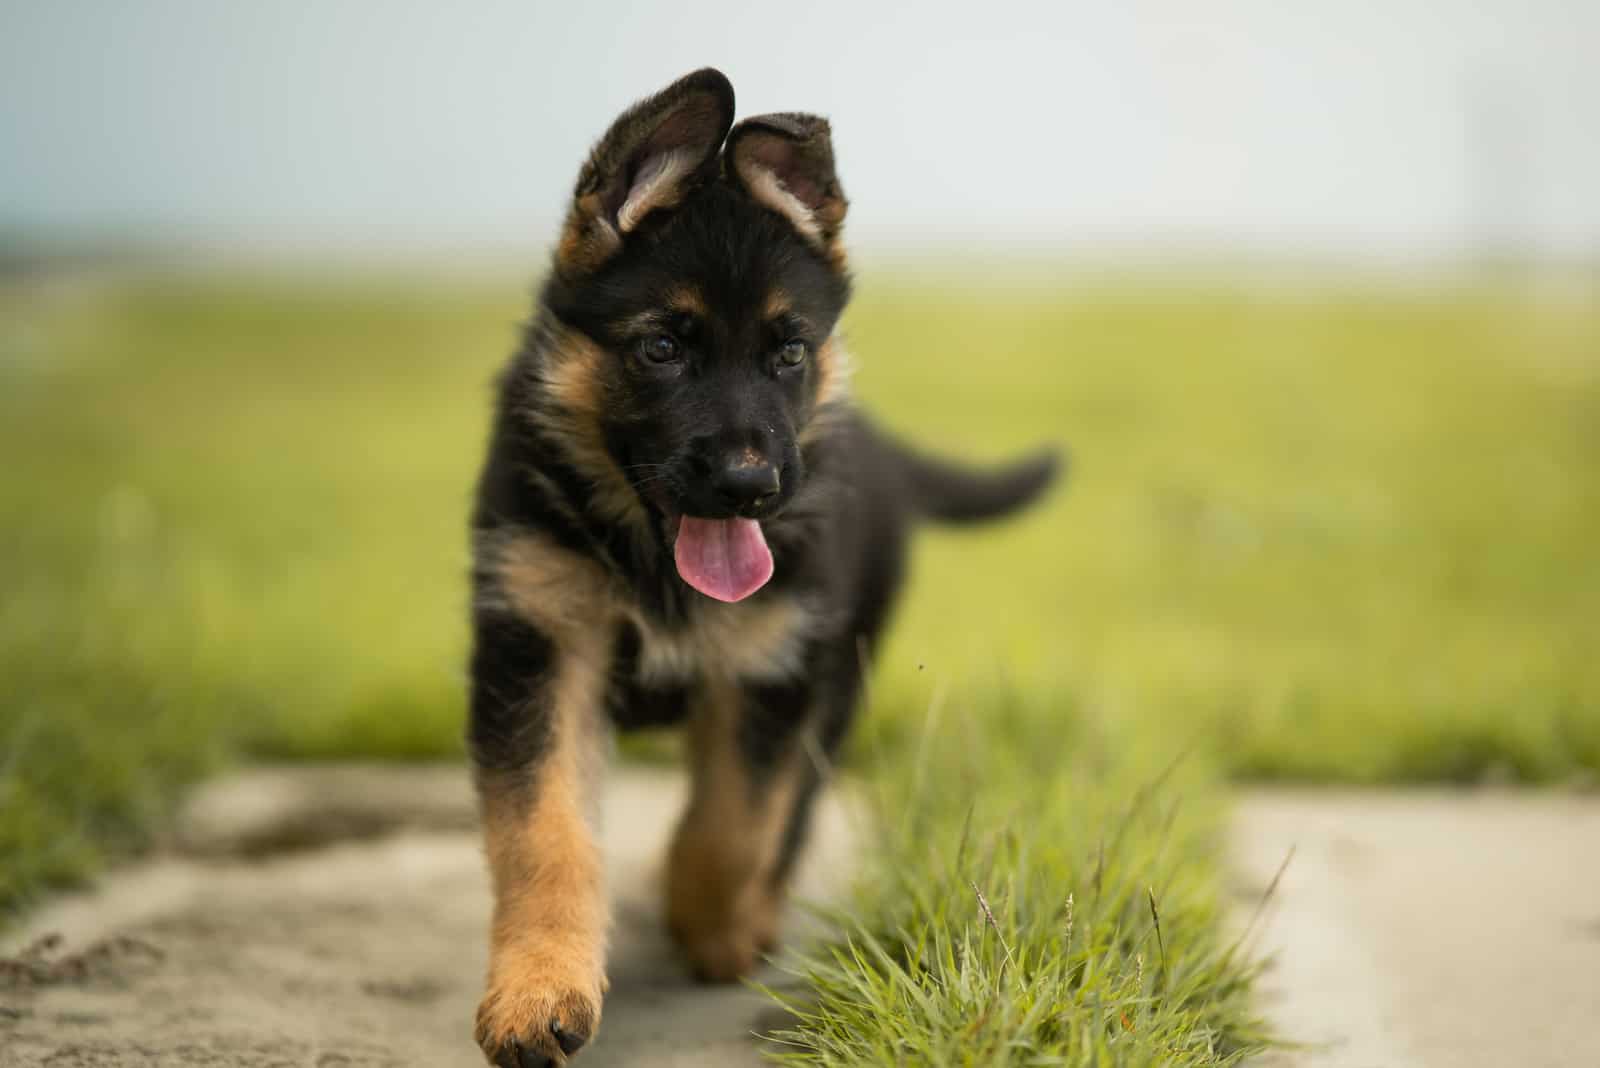 Cute german shepherd puppy playing on the grass